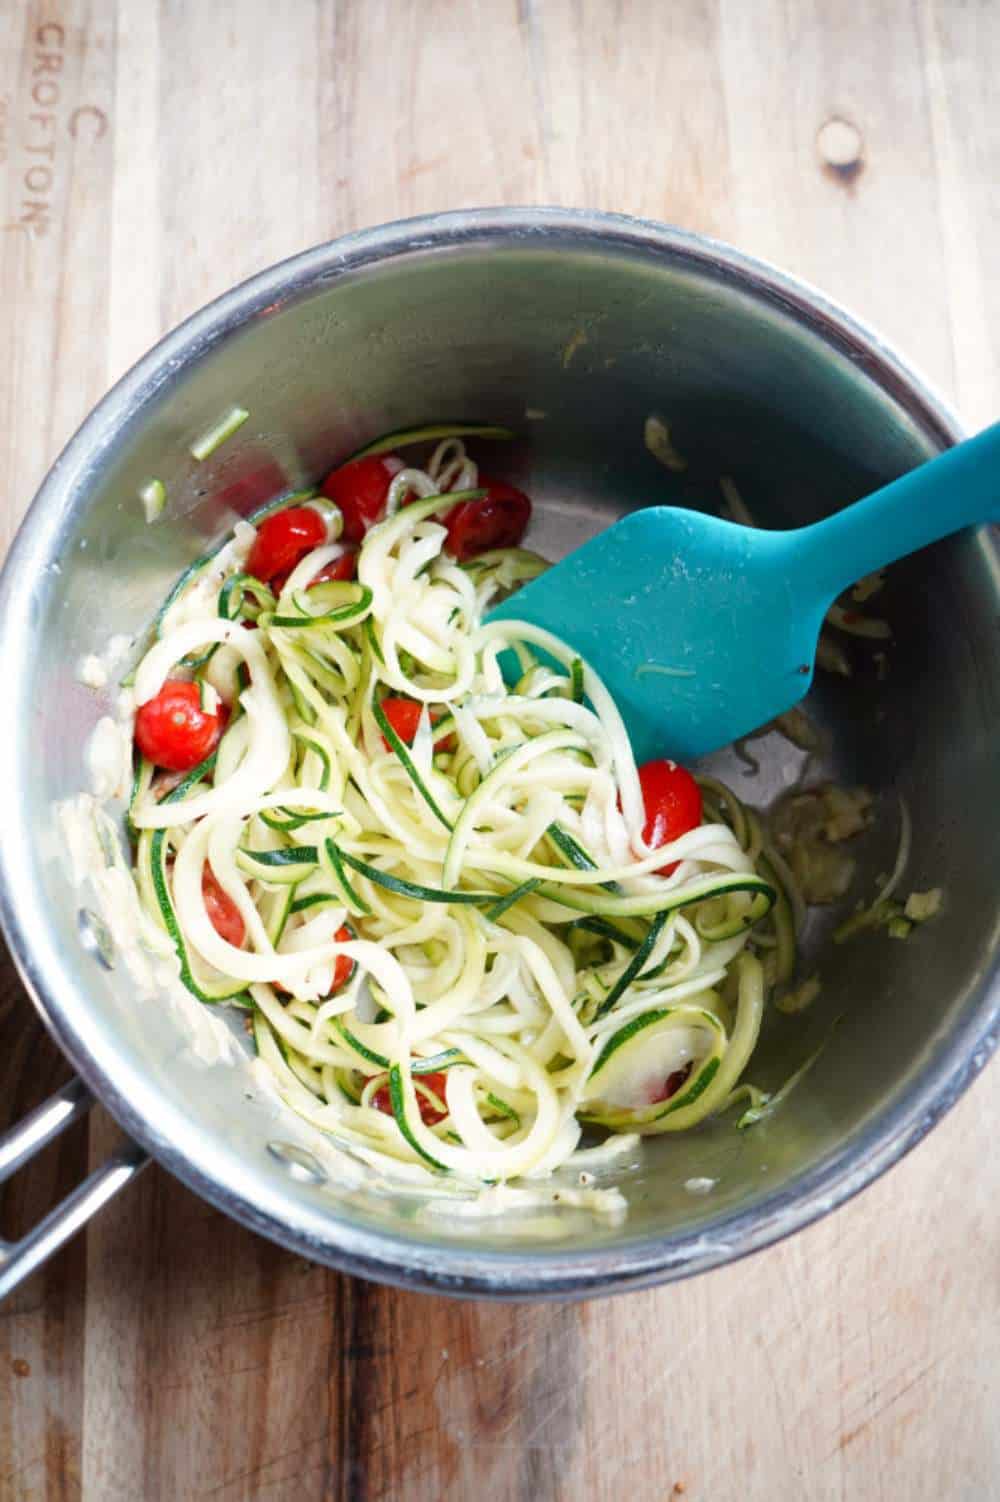 How to make zucchini noodles on stove